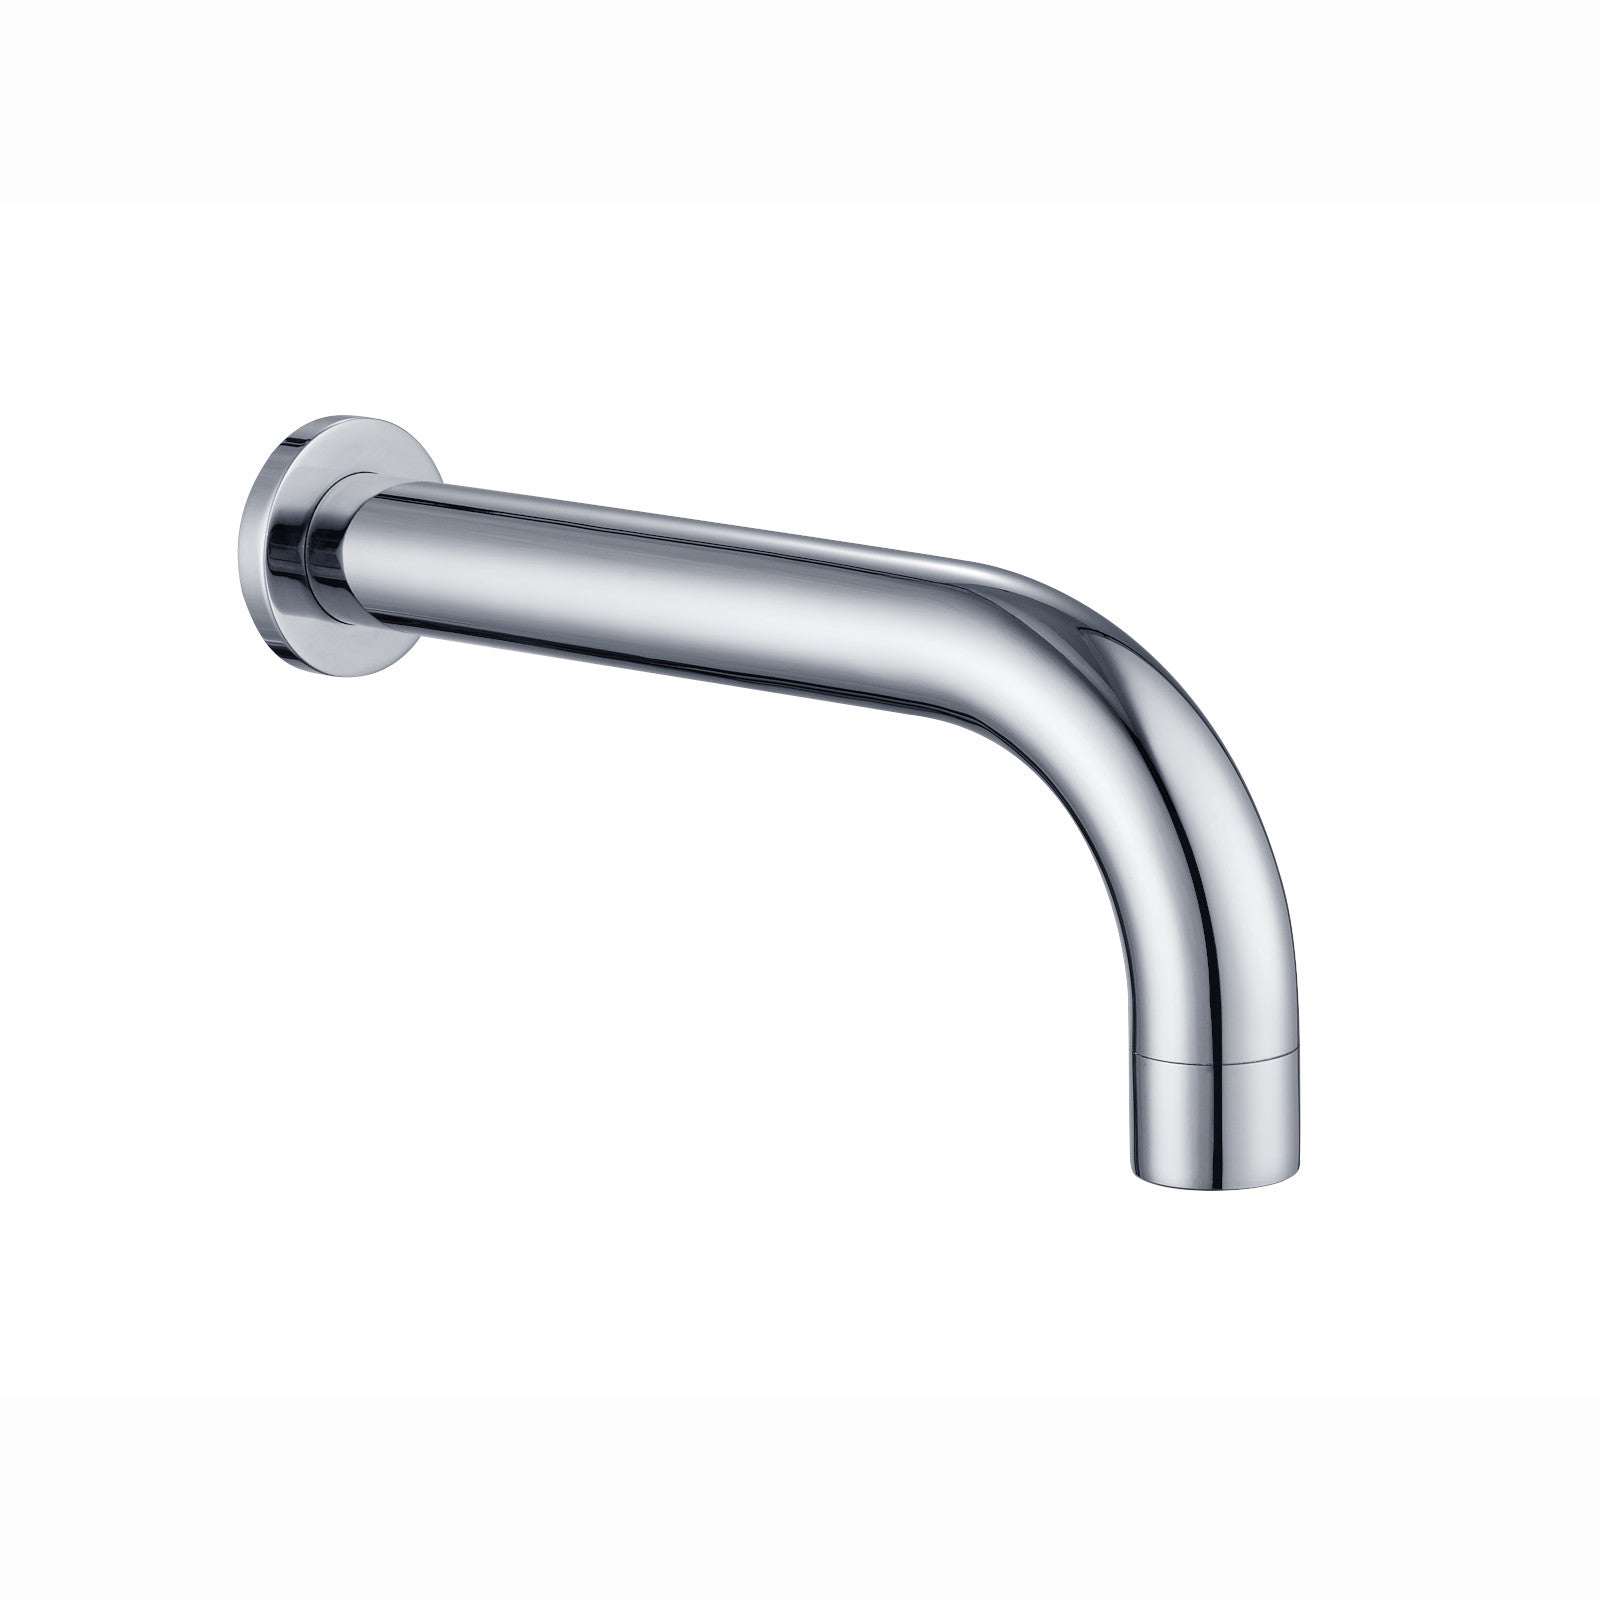 Round bath or basin spout wall mounted - chrome - Showers